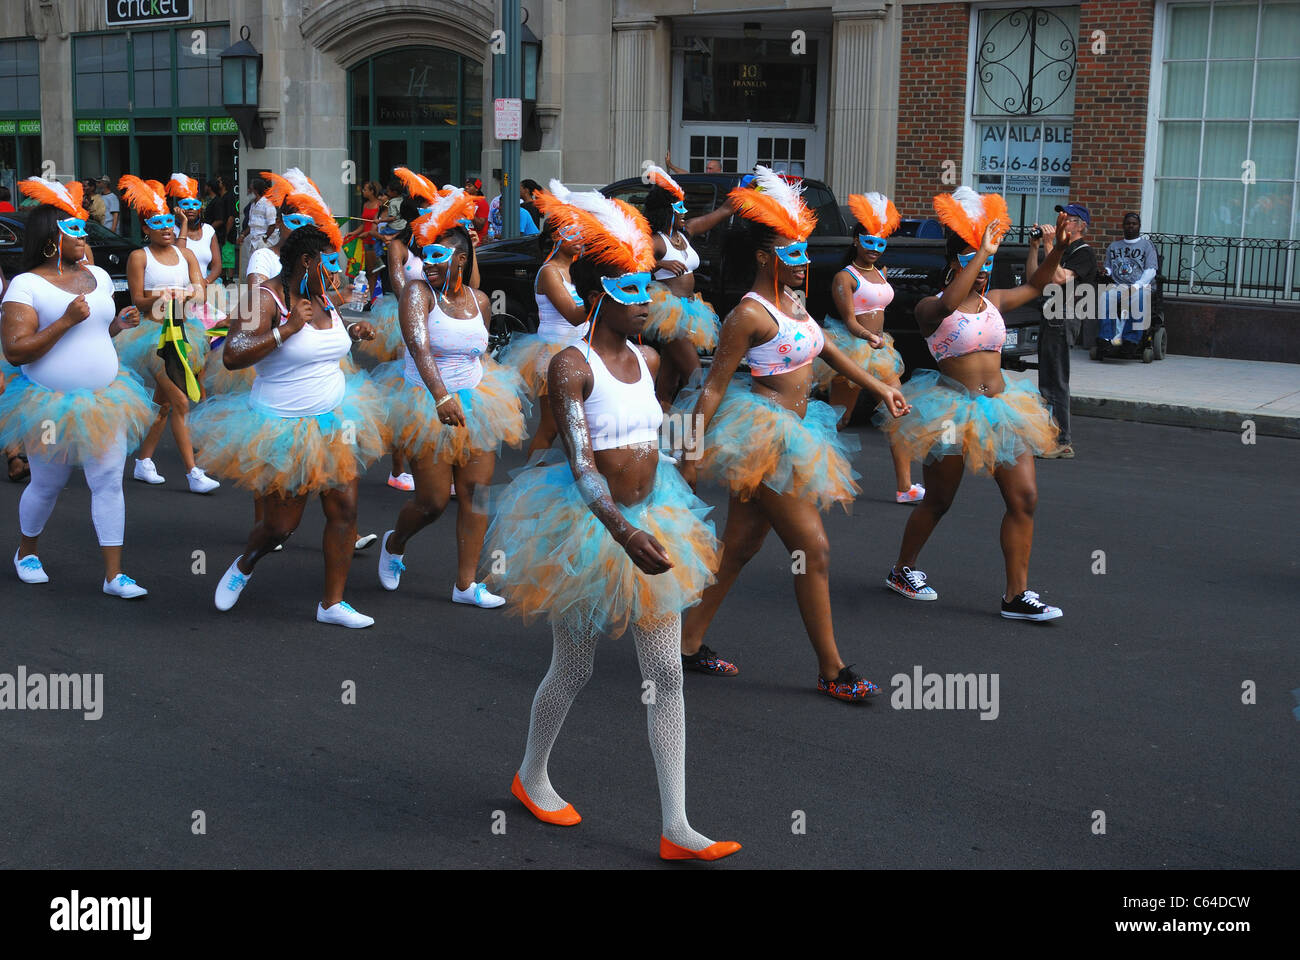 Woman's group representing Barbados march in Caribbean festival parade. Stock Photo